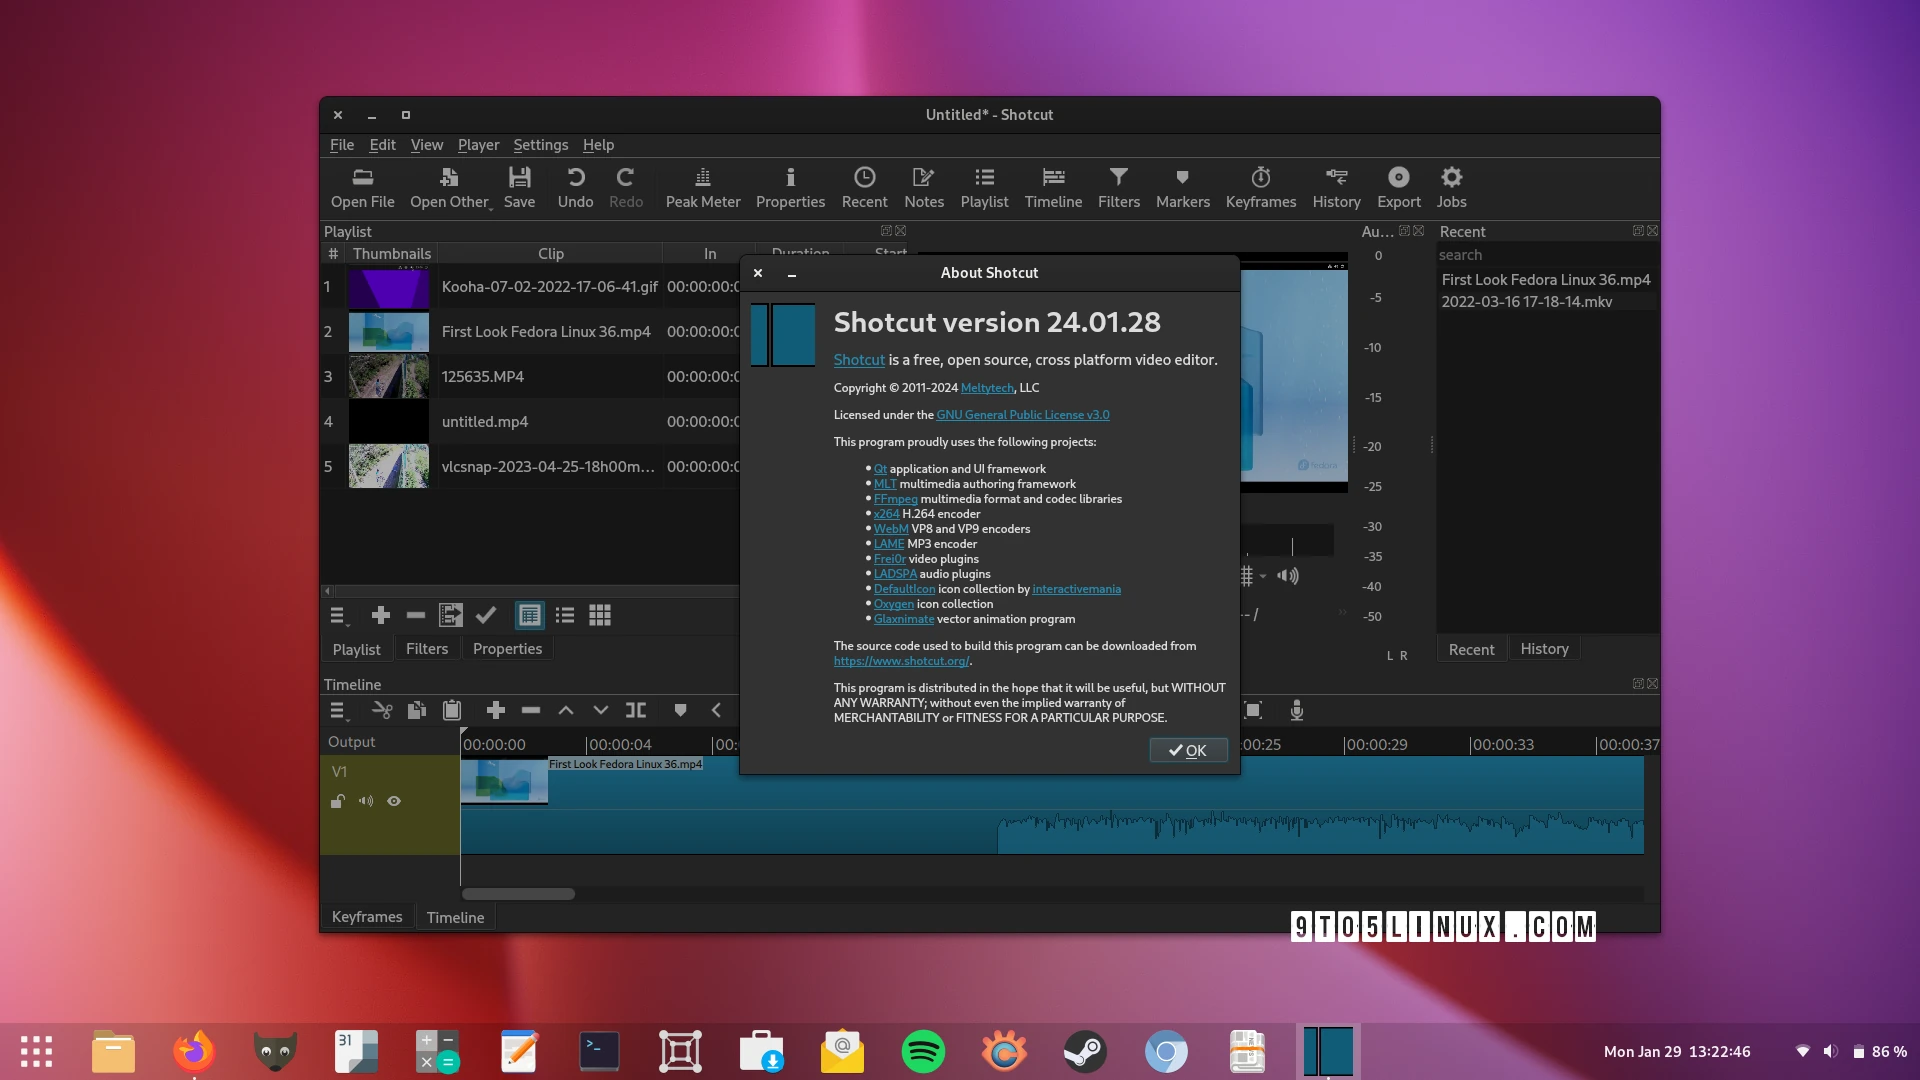 Shotcut 24.01 Open-Source Video Editor Released with Many New Features